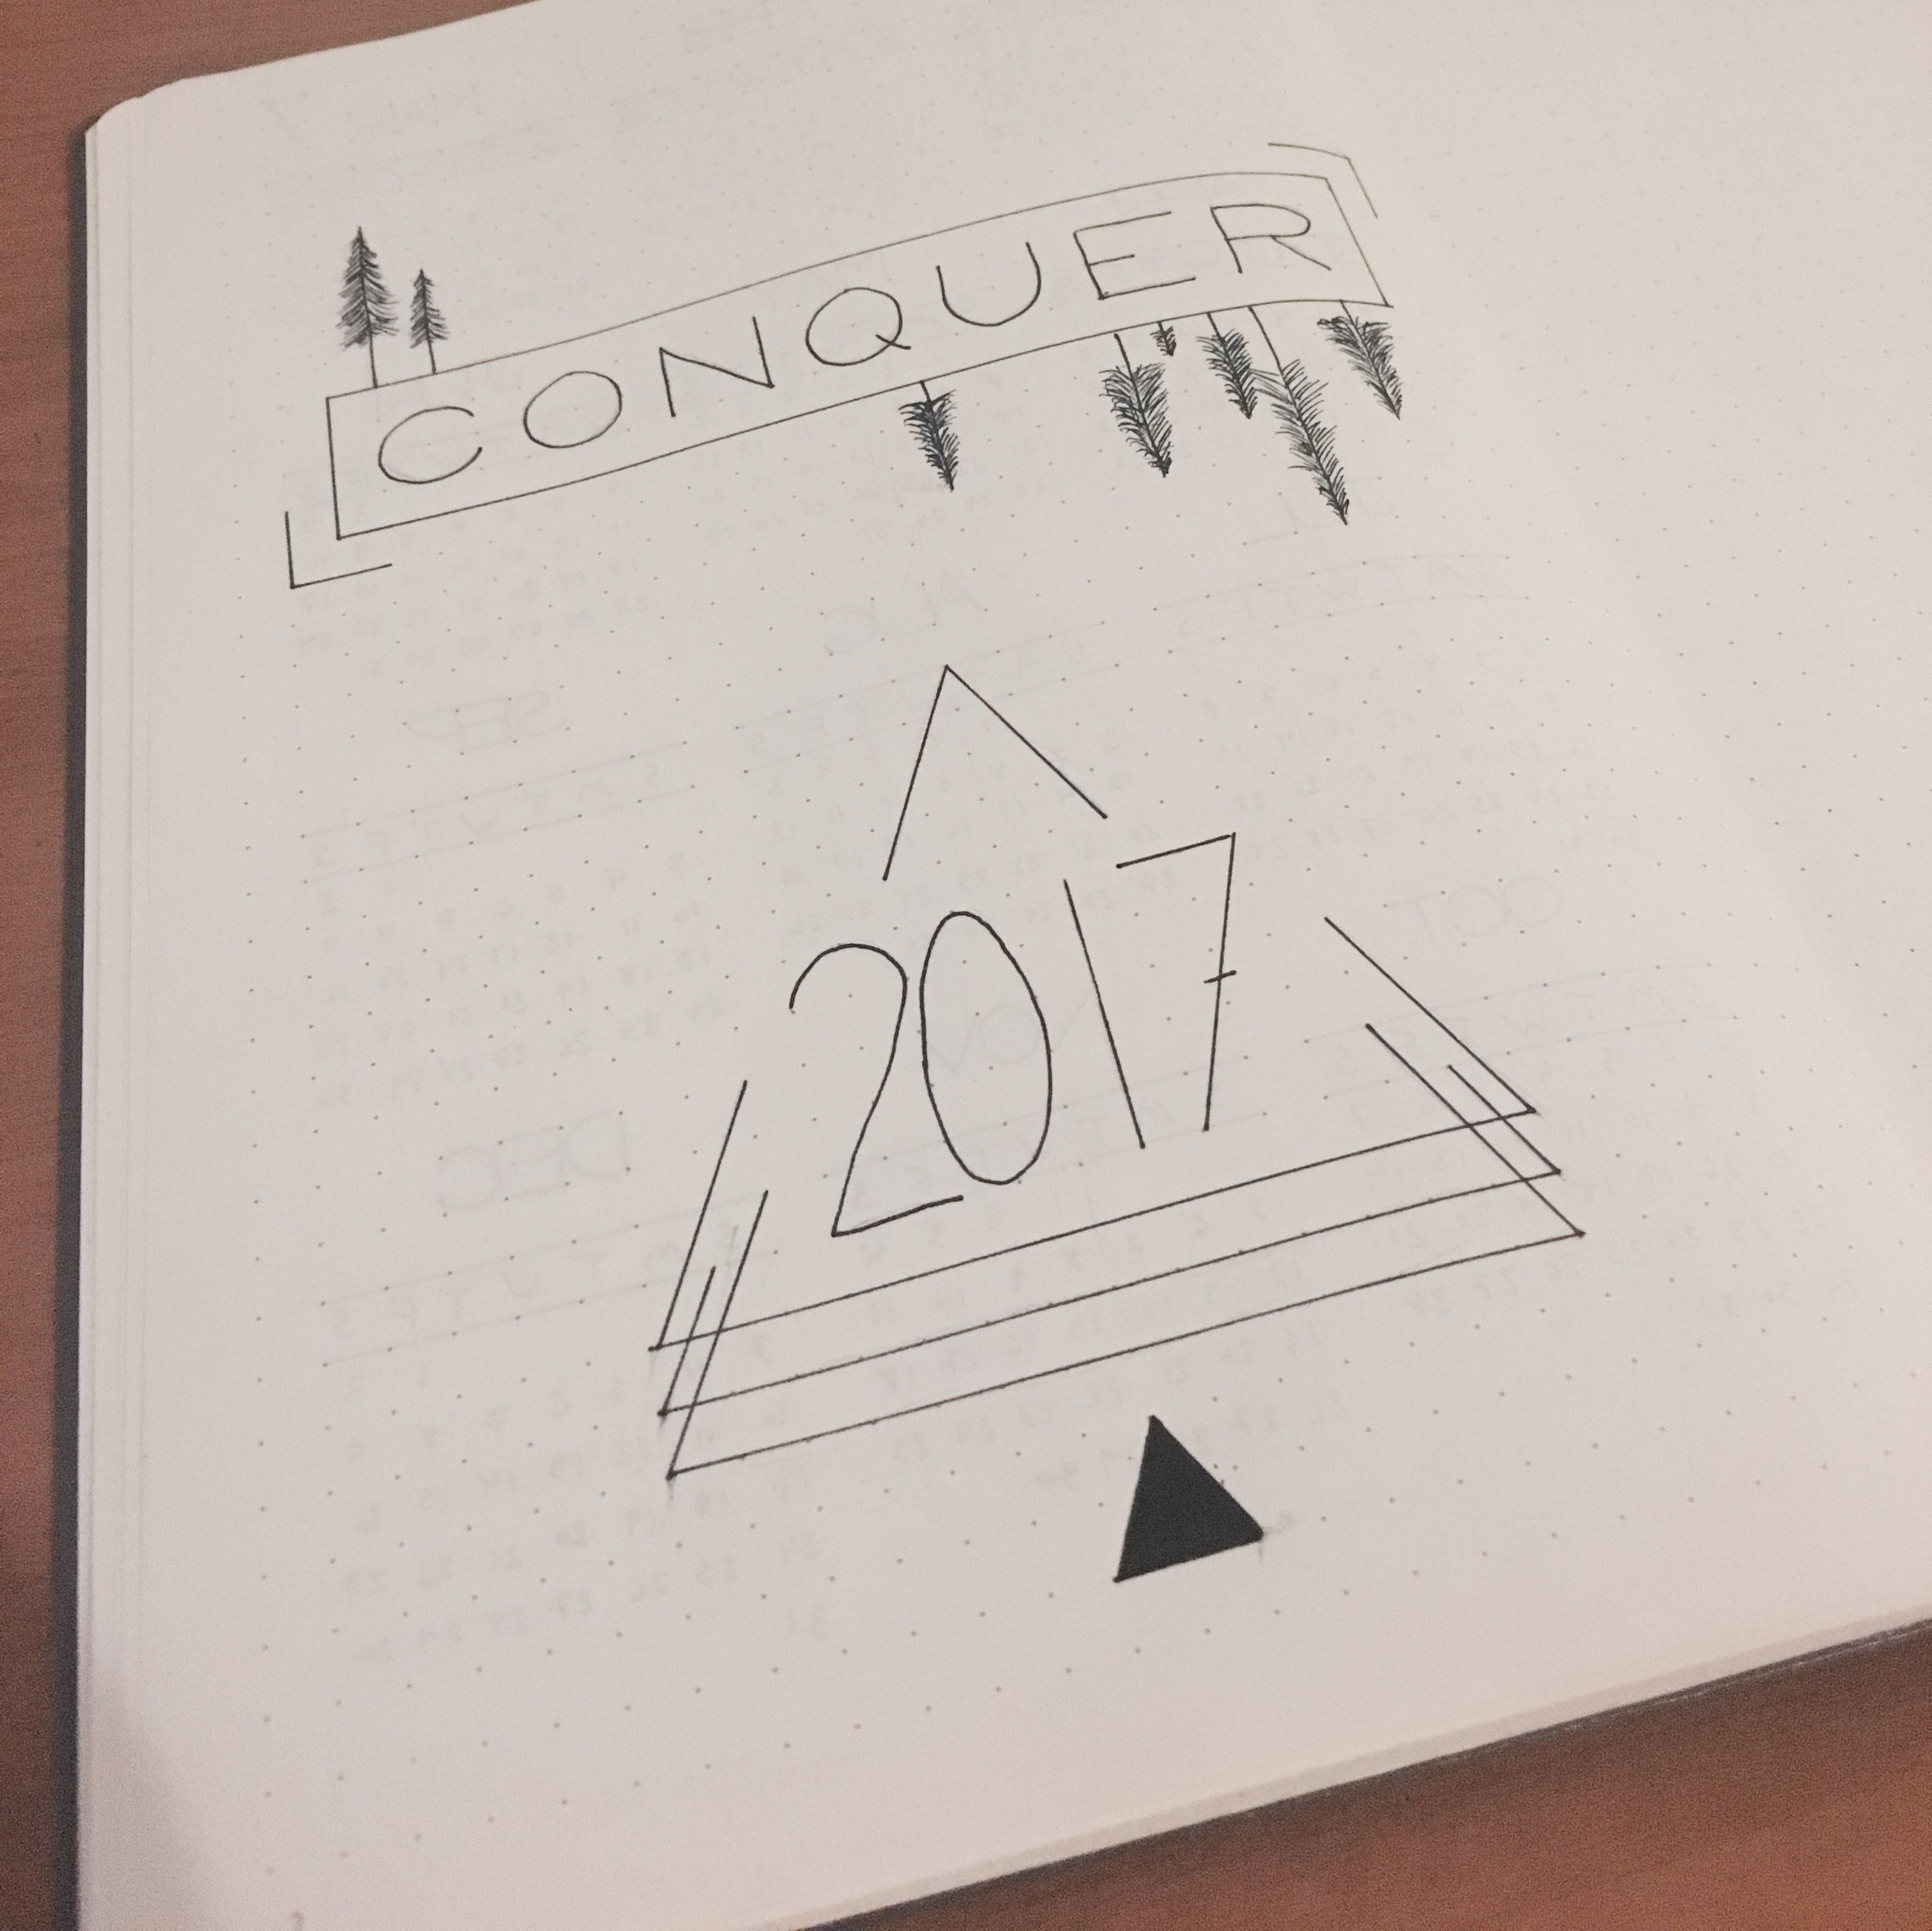 Bullet Journal 2017 - Starting the year of right with this geometry ...